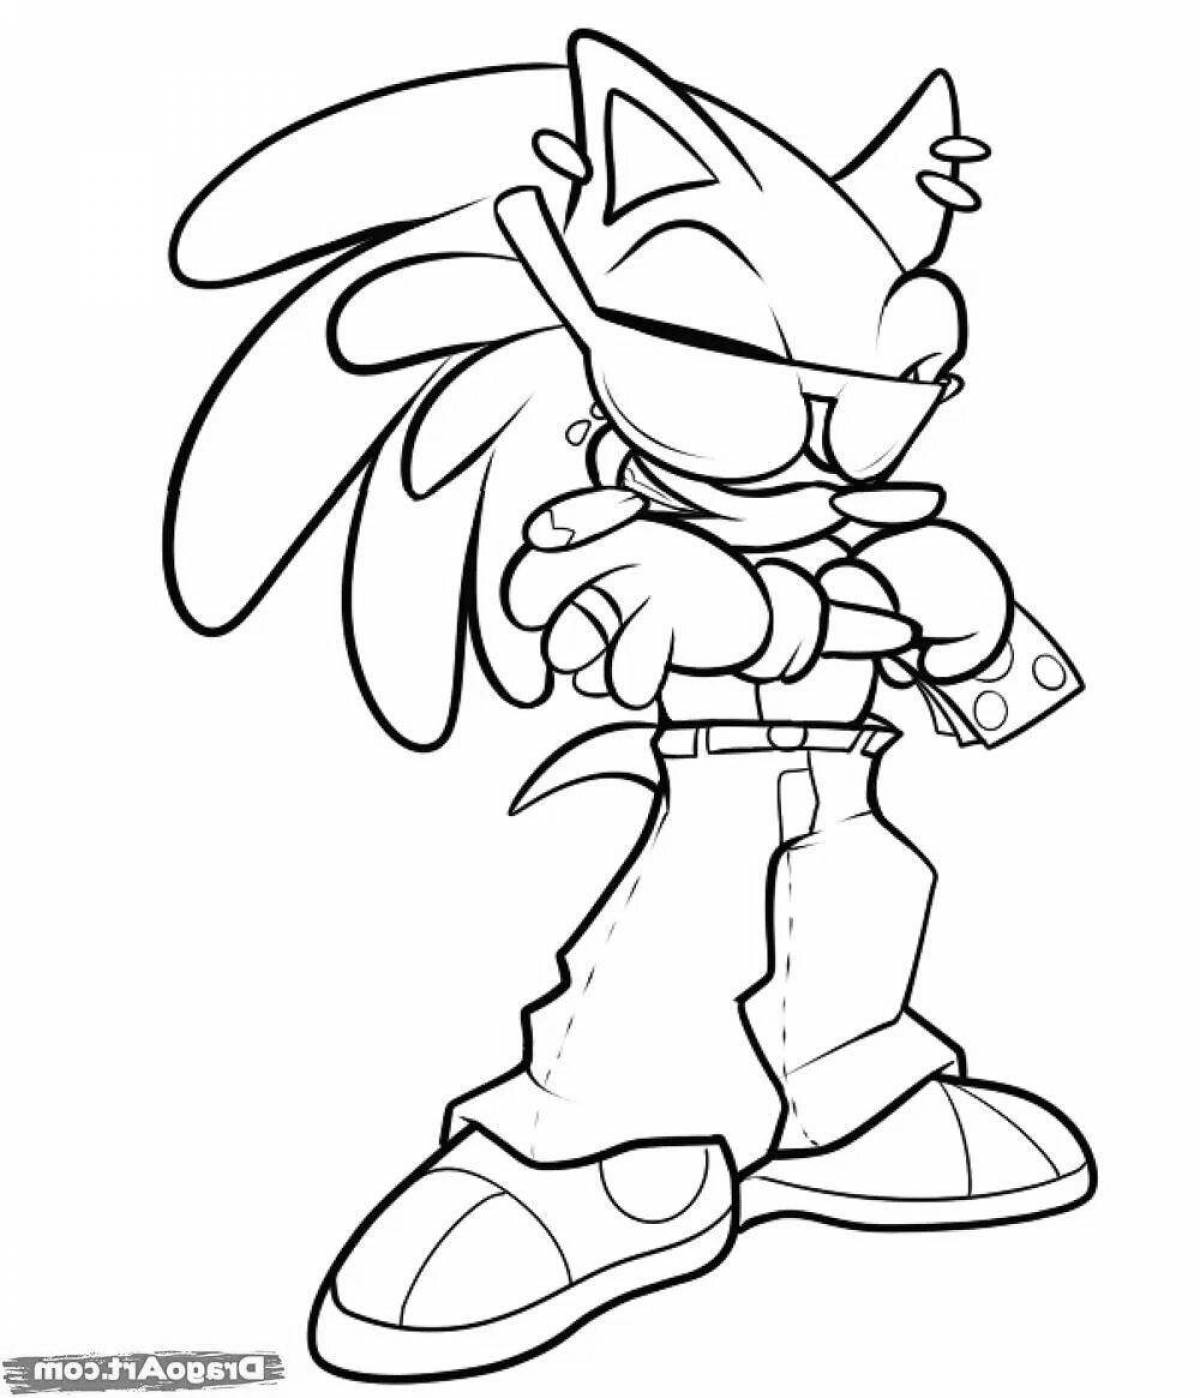 Knuckles and Rouge Holiday Coloring Page